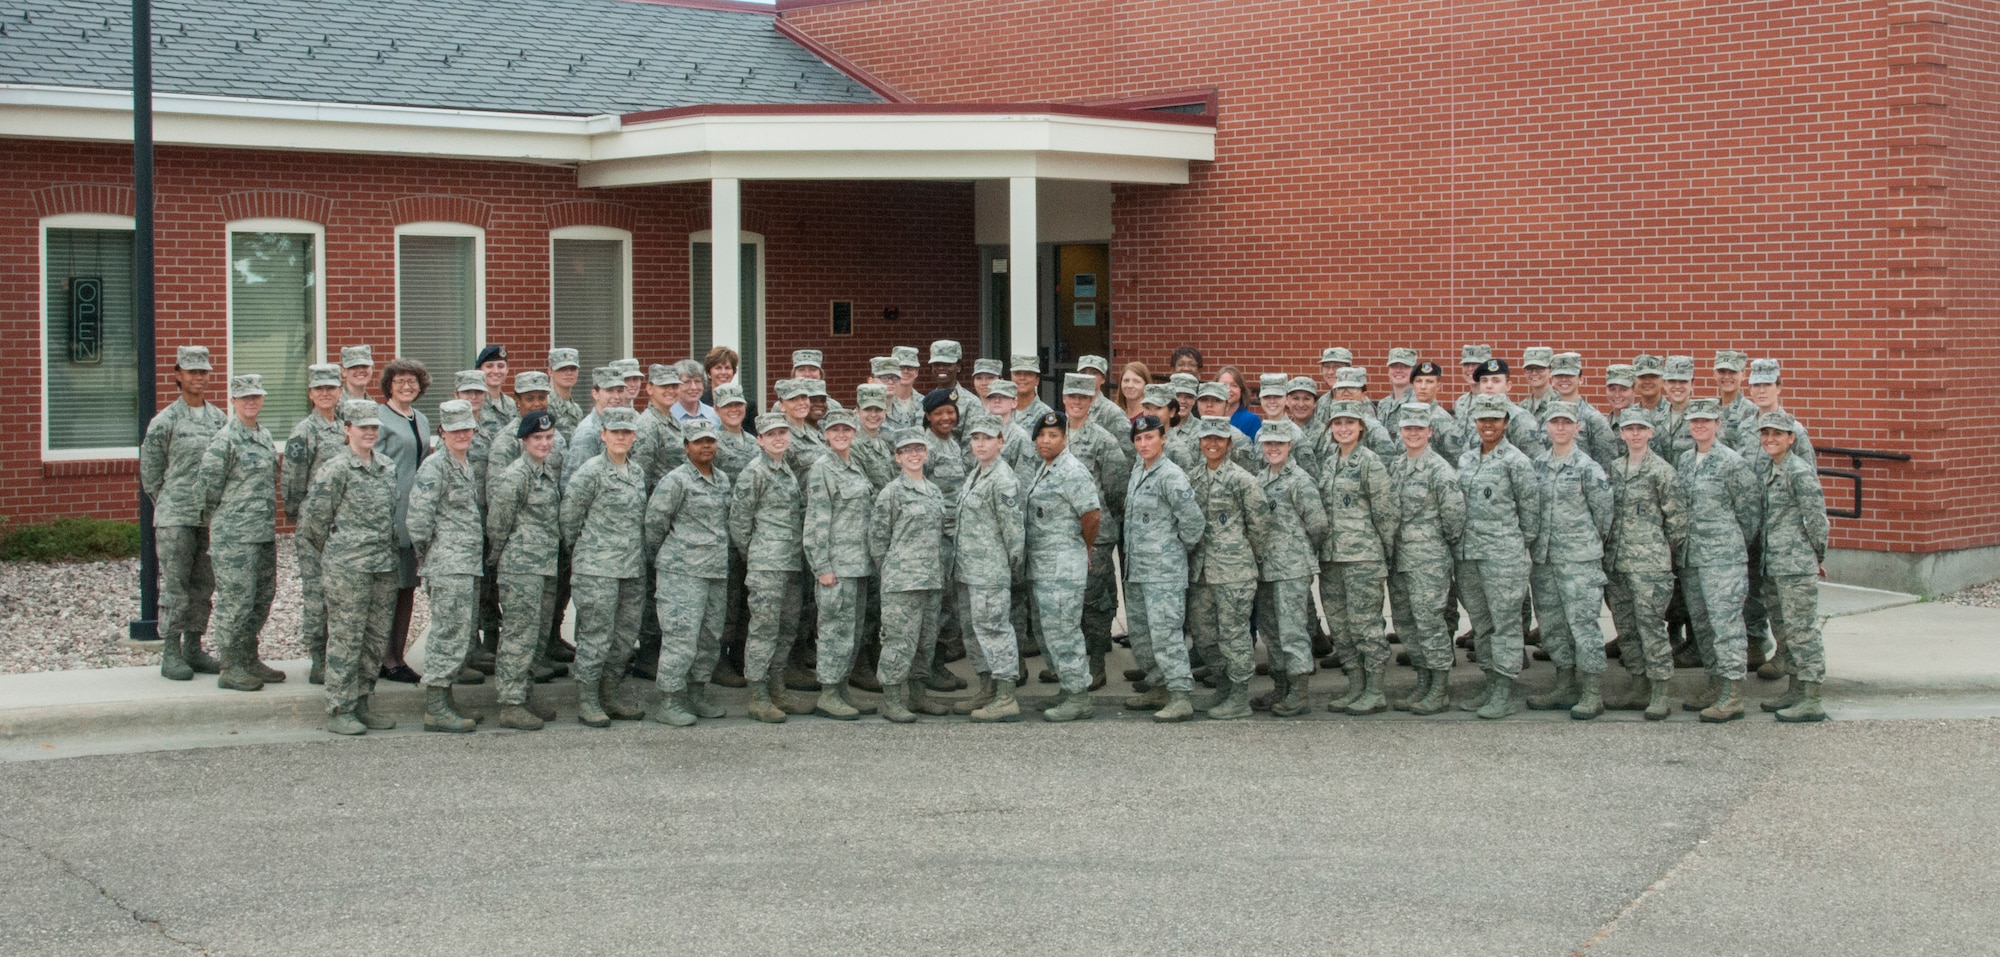 Airmen and guest speakers who attended the 20th Air Force Women’s Leadership Symposium pose for a photo outside the Trail’s End Event Center on F.E. Warren Air Force Base, Wyo., Sept. 16, 2015. The two-day symposium brought women from across 20th AF together to develop leadership, network and address issues faced by women in the Air Force. (U.S. Air Force photo by Senior Airman Jason Wiese)